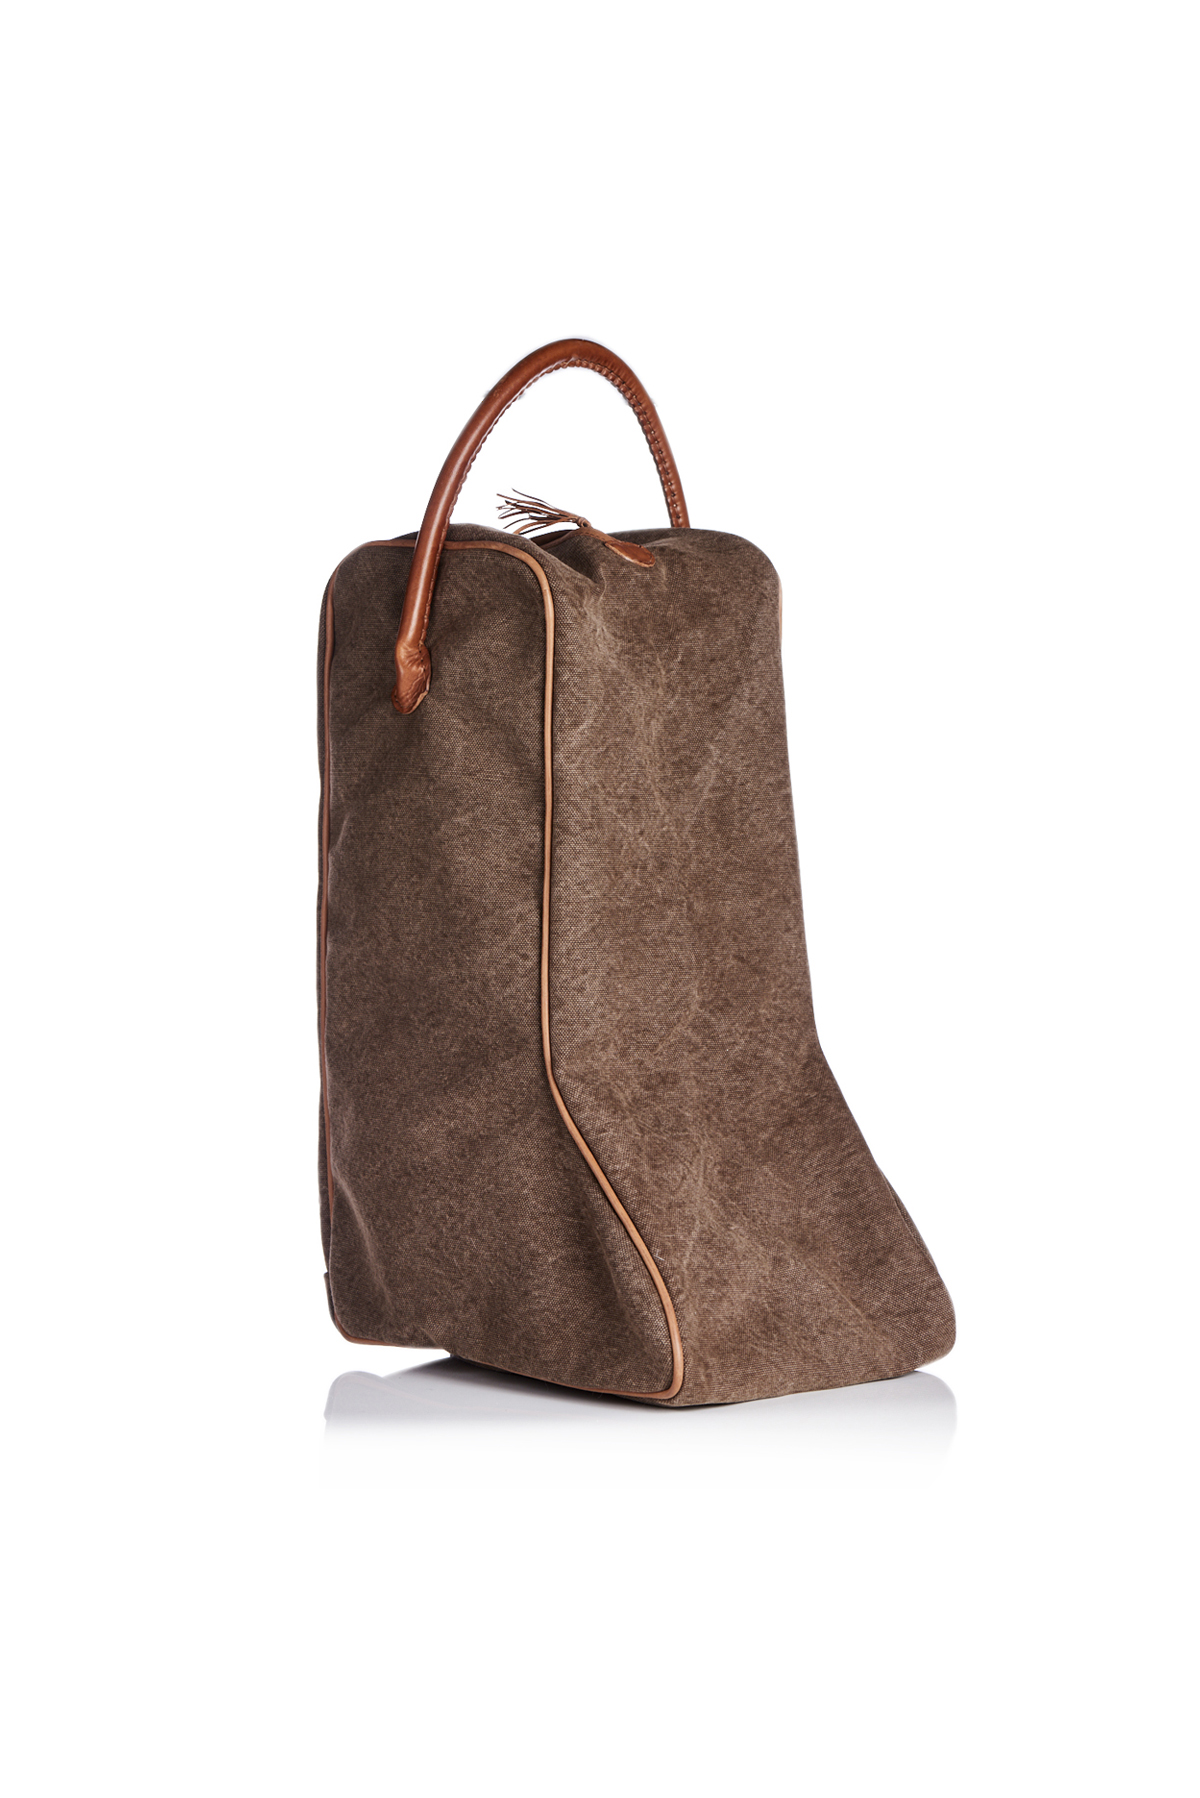 Marcelle Backpack by Clare V. for $120